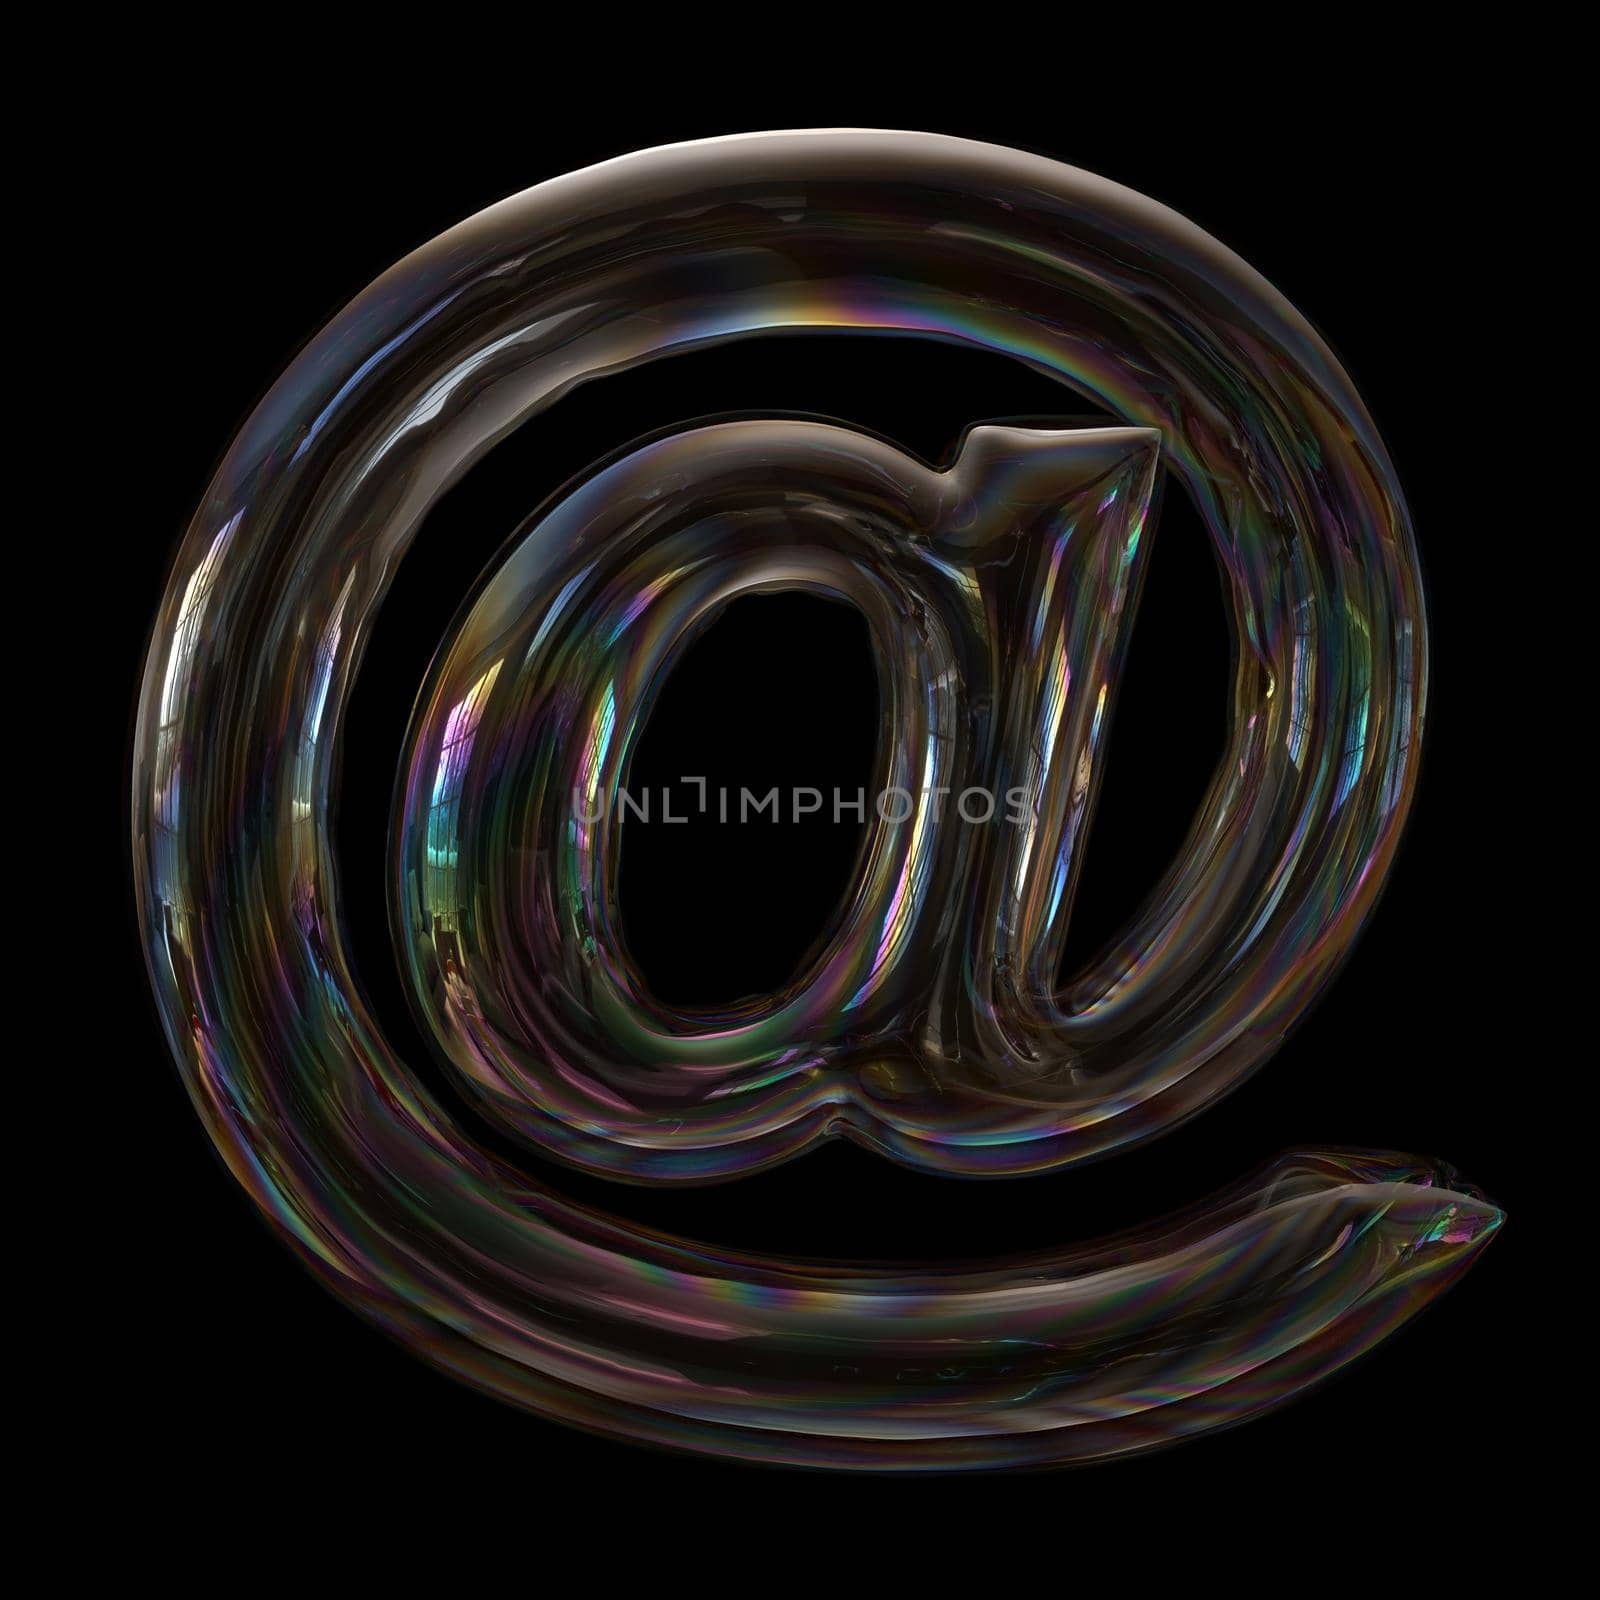 bubble at-sign isolated on a black background.
This 3d font collection is well-suited for various creative projects including but not limited to : Childhood. events. nature...